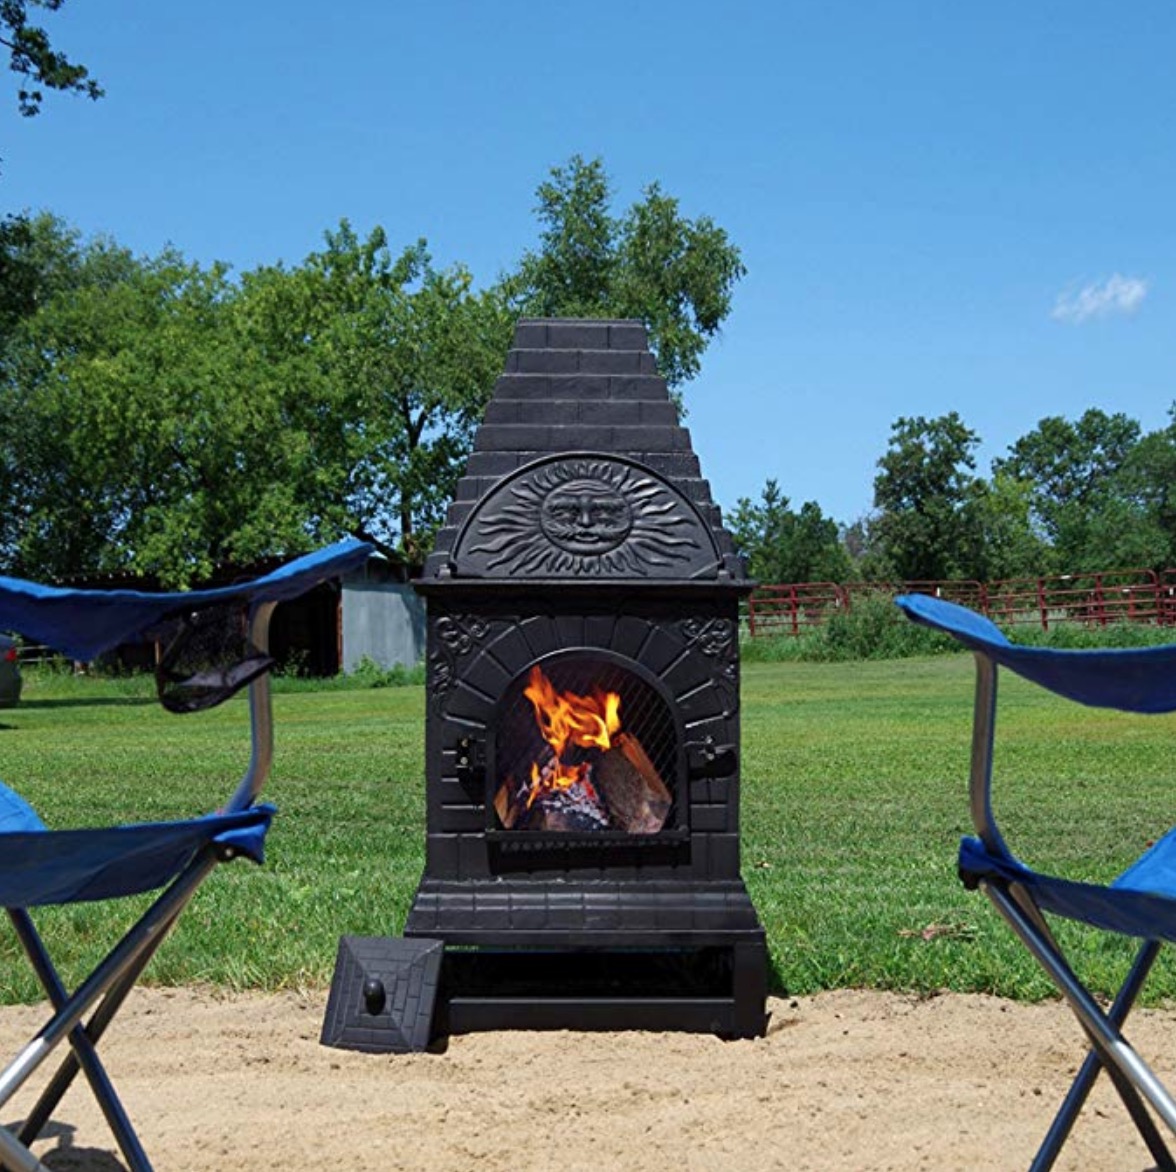 Review Of The 5 Best Cast Iron Chimineas, Extra Large Cast Iron Fire Pit